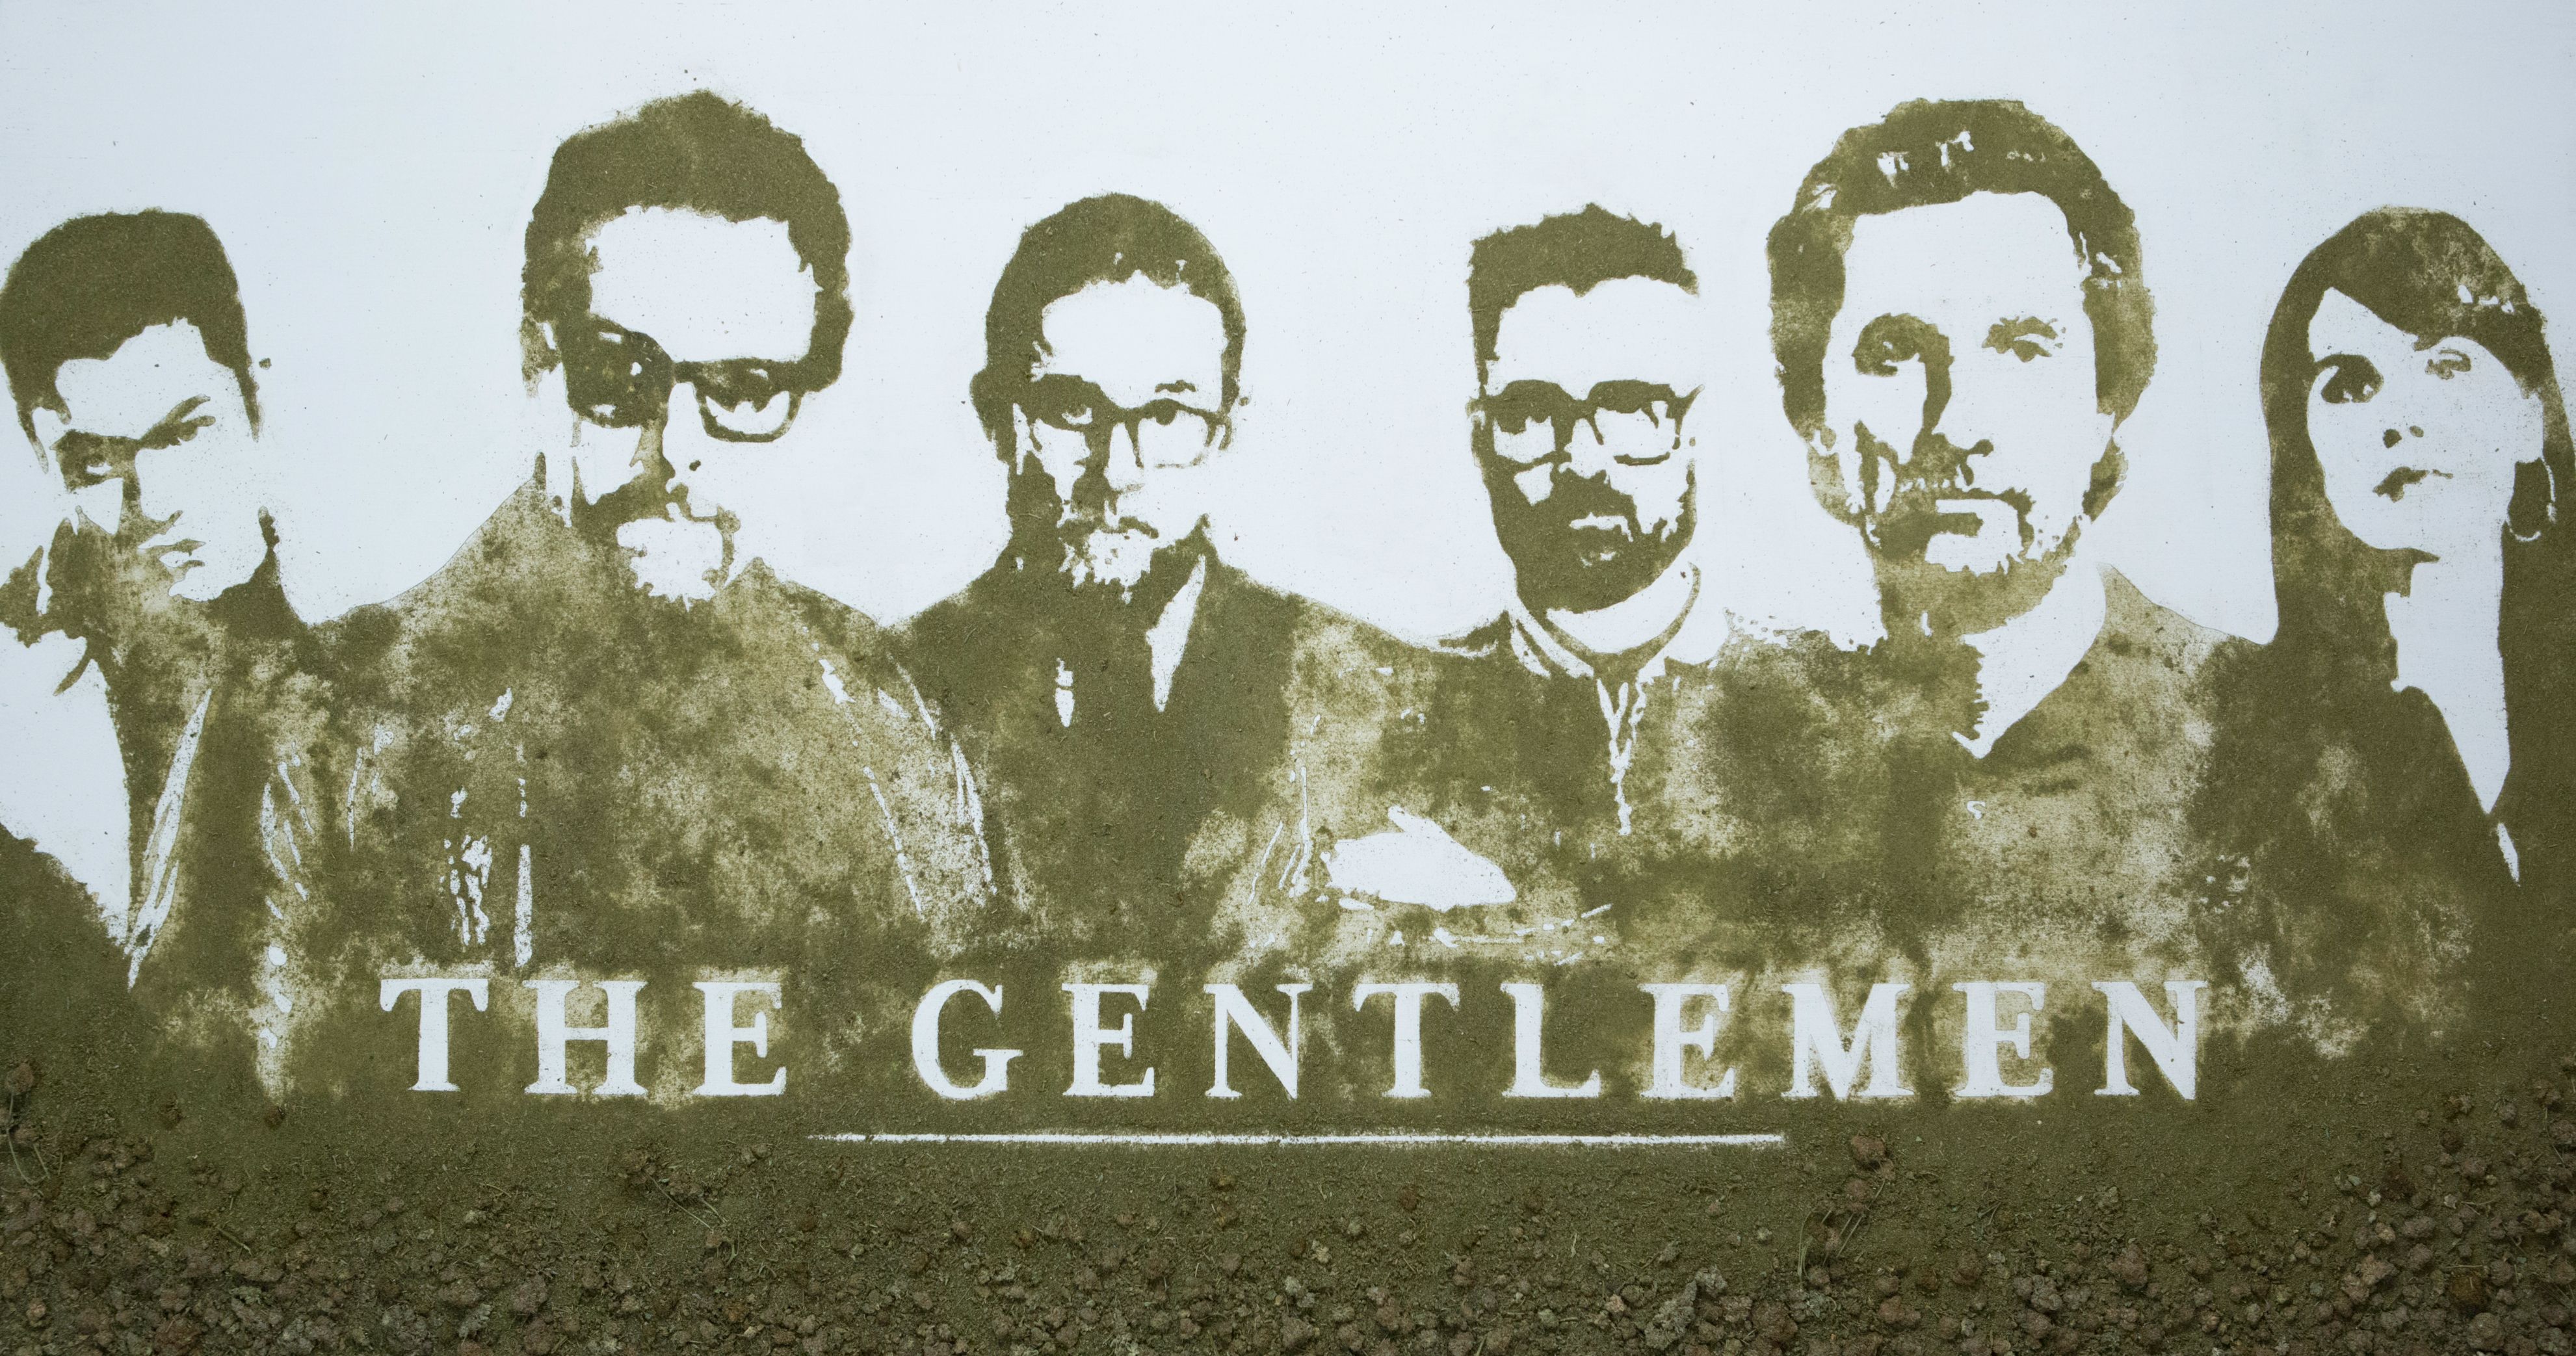 Watch the Hollyweed Artist Create the World's First Weed Movie Poster for The Gentlemen